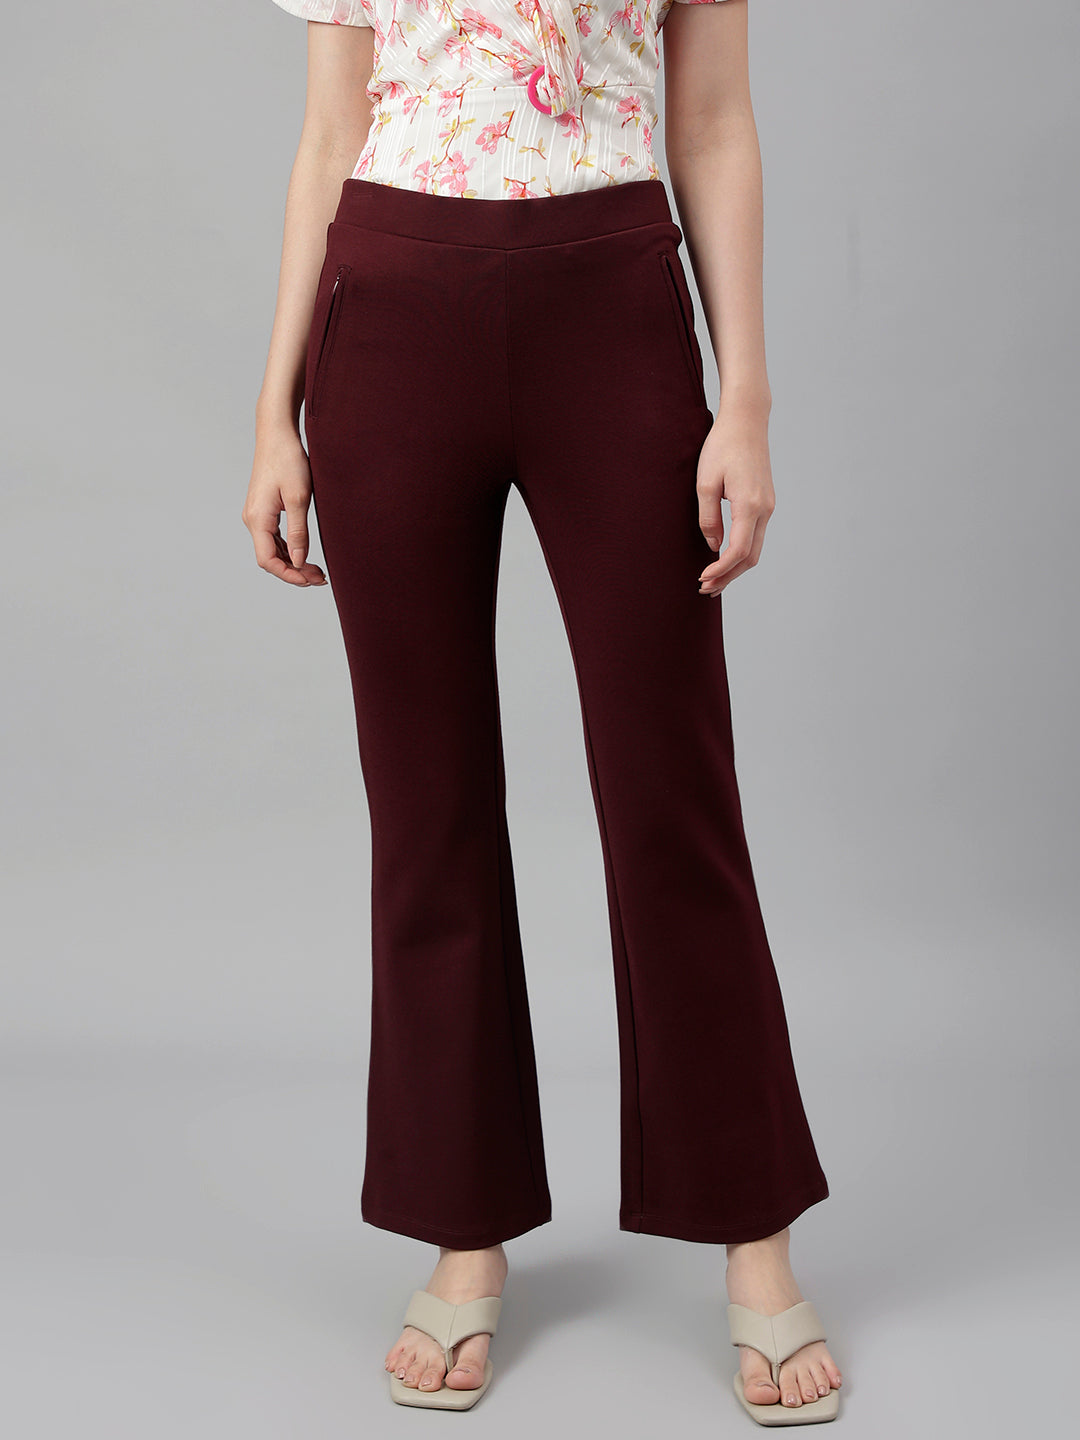 Maroon Solid Jeggings Pant